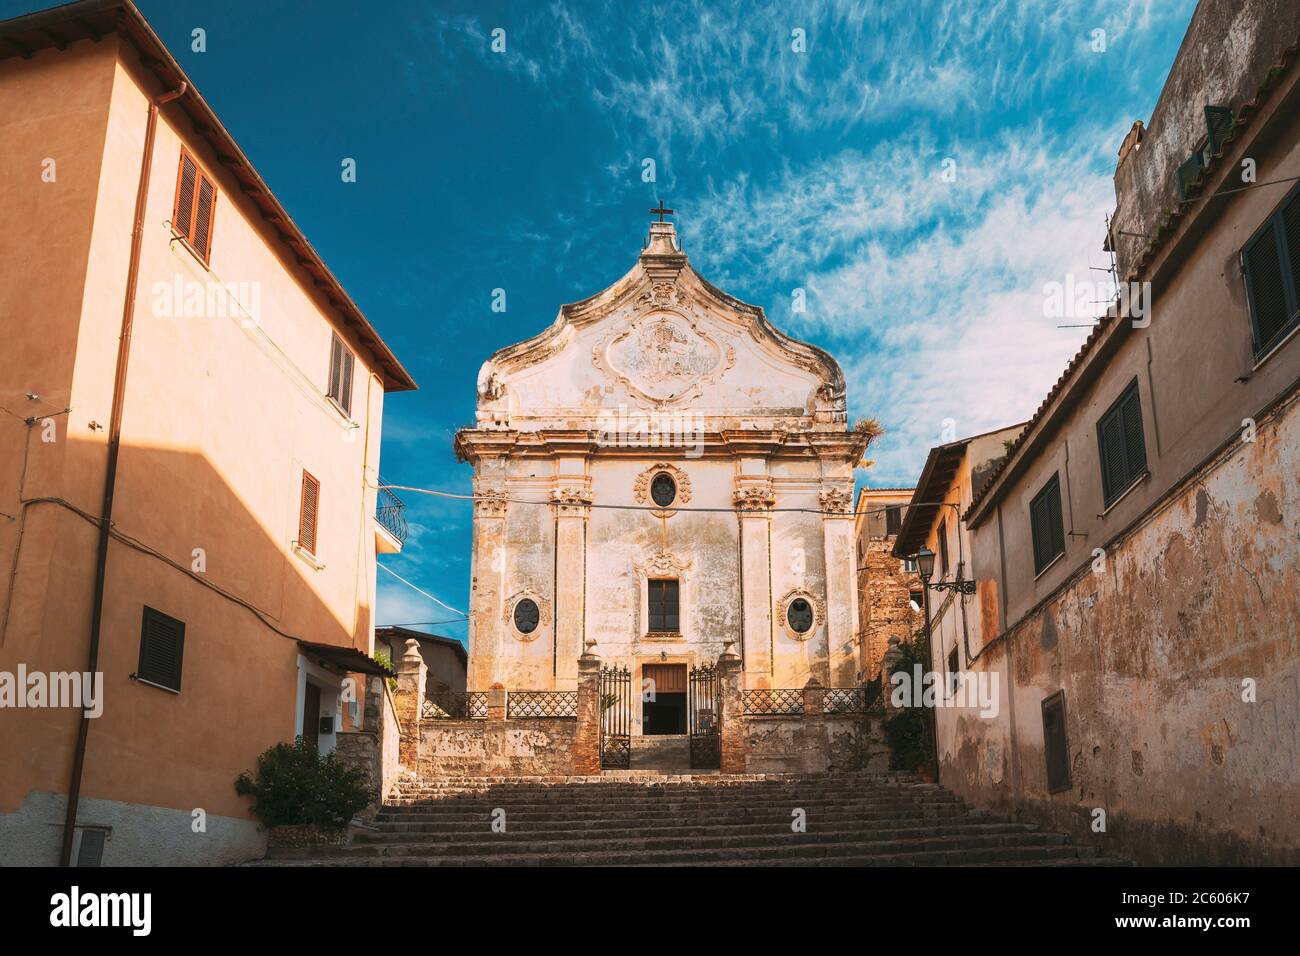 Terracina, Italy. Church Of Purgatory In Baroque Style Built On Site Of Church Of St. Nicholas. Stock Photo